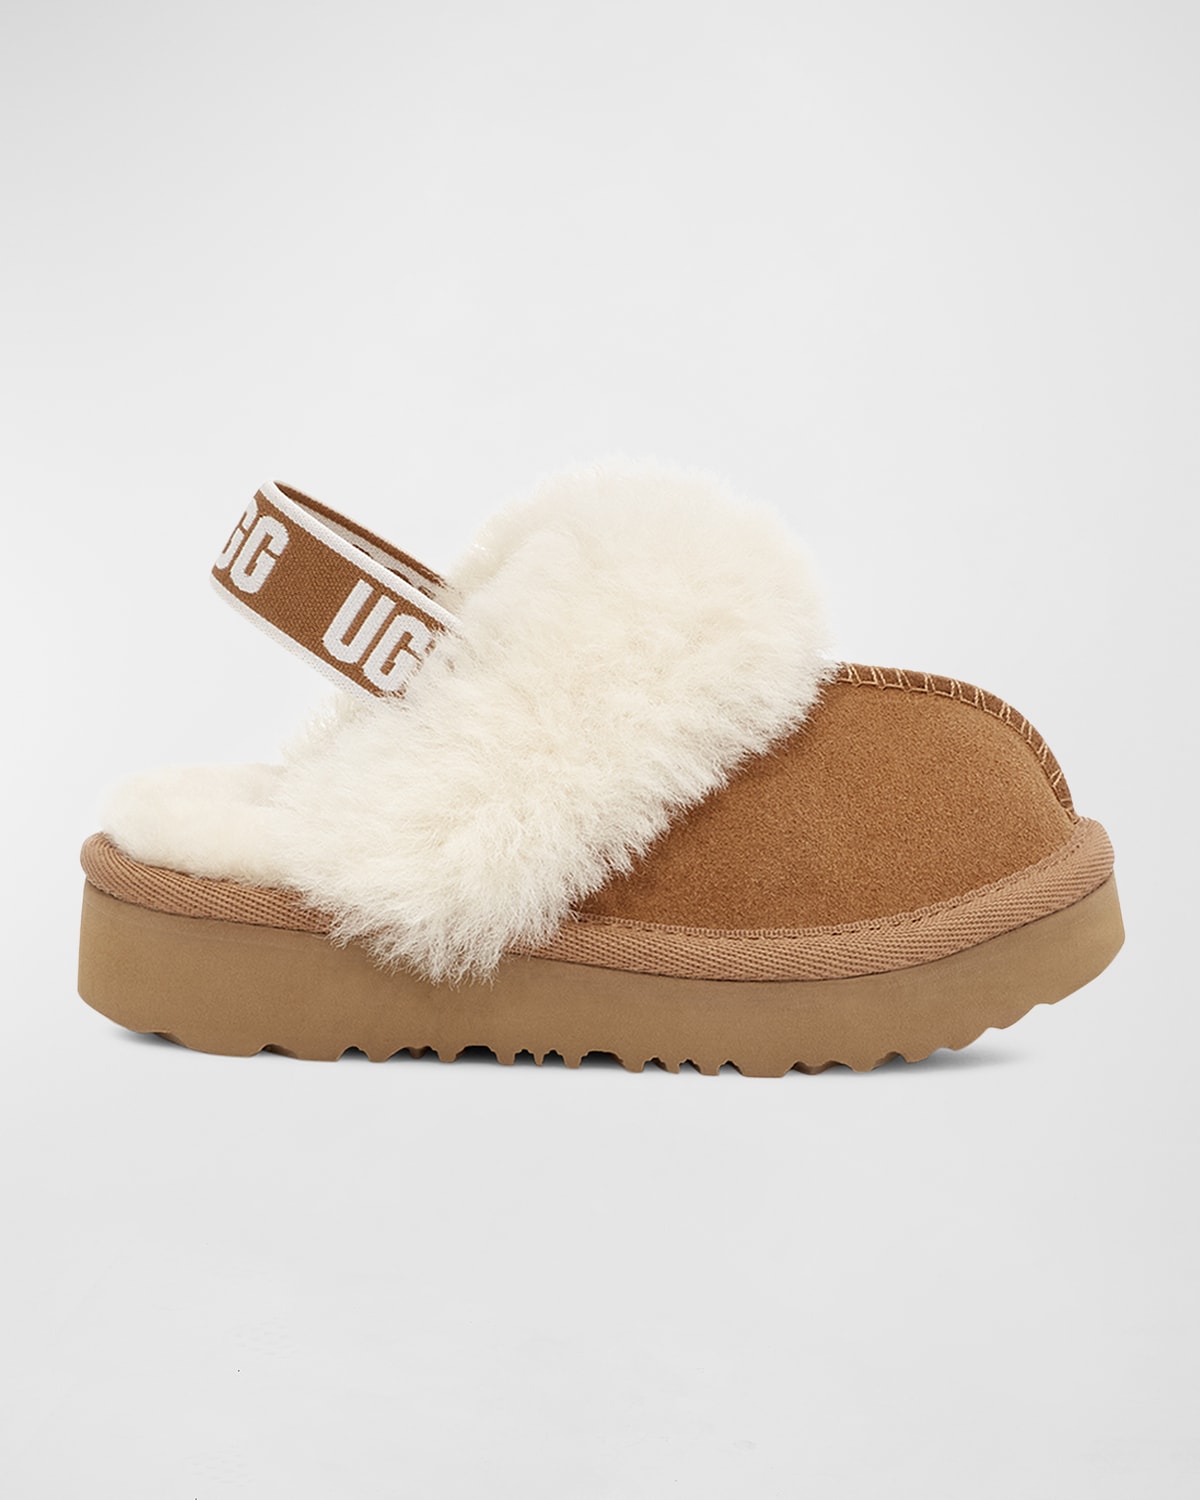 UGG GIRL'S FUNKETTE SUEDE SHEARLING SLIPPERS, BABY/TODDLERS